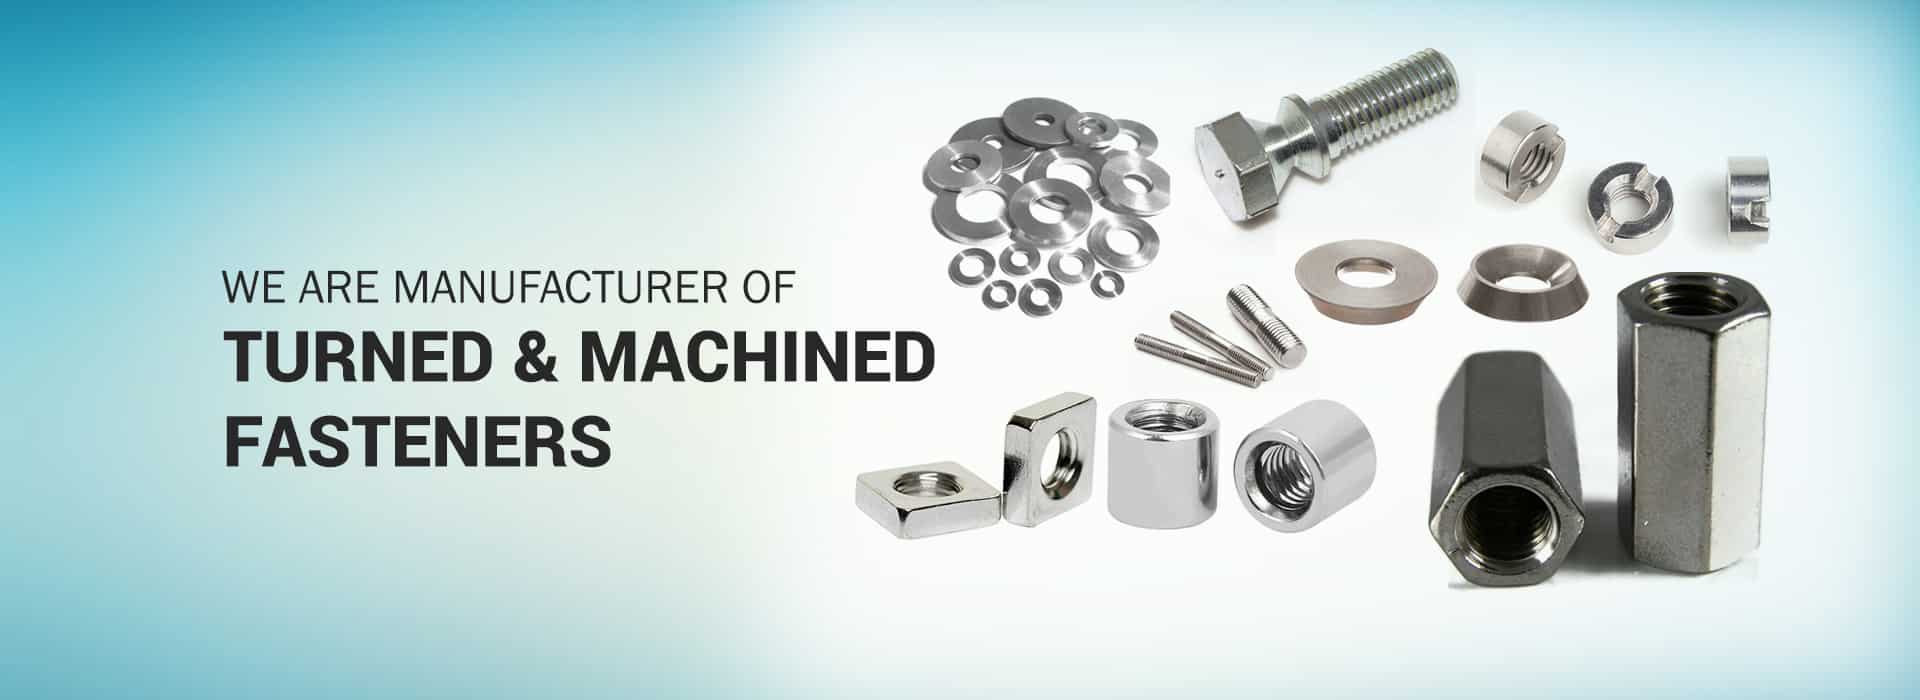 We are Manufacturer of Turned & Machined Fasterers, Stainless Steel Bolt Manufacturer